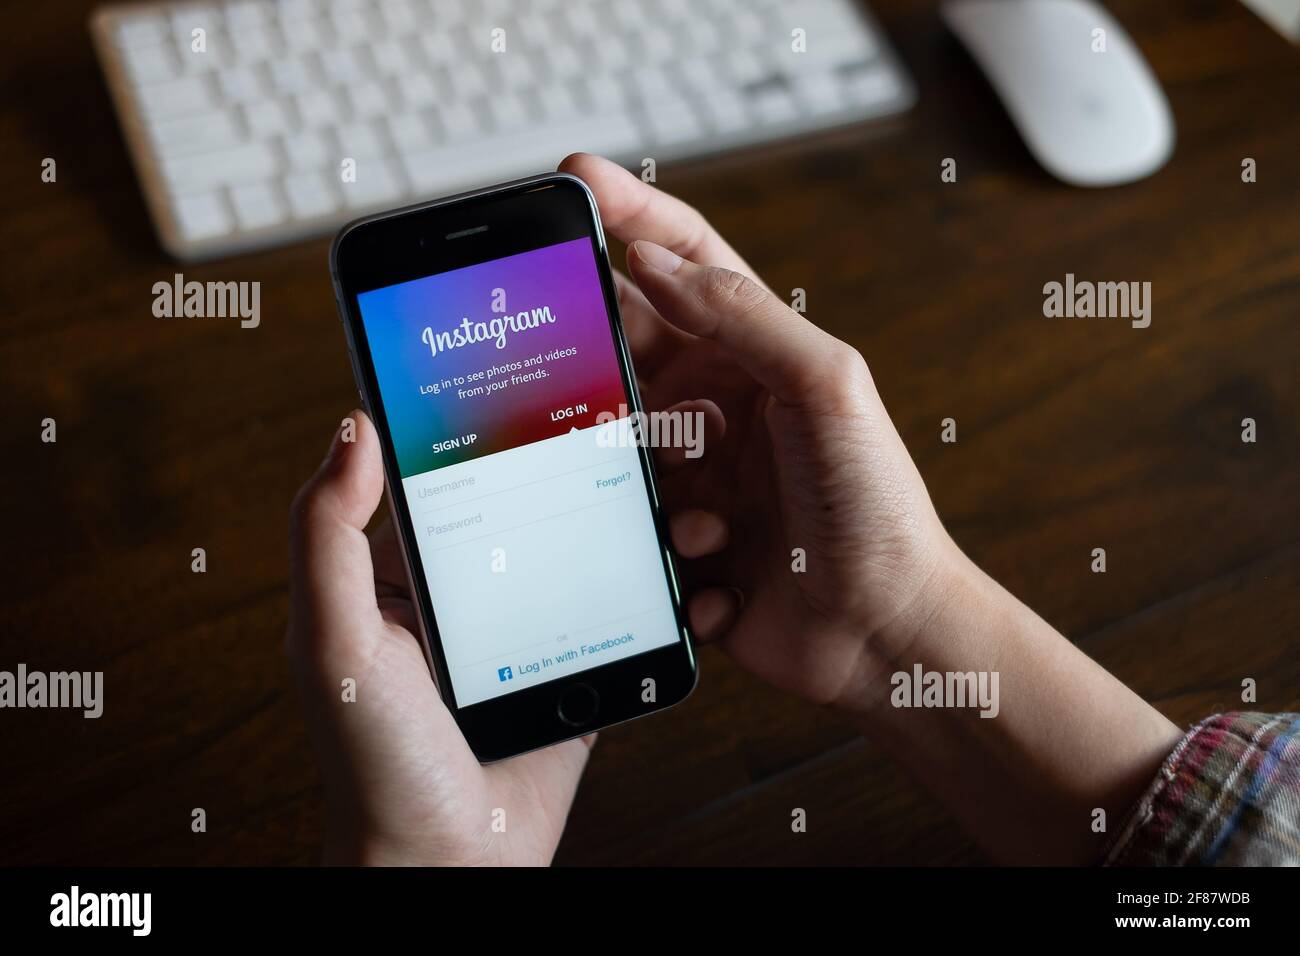 CHIANG MAI, THAILAND - FEB 26, 2020: A woman hand holding iphone with login screen of instagram application. Instagram is largest and most popular Stock Photo